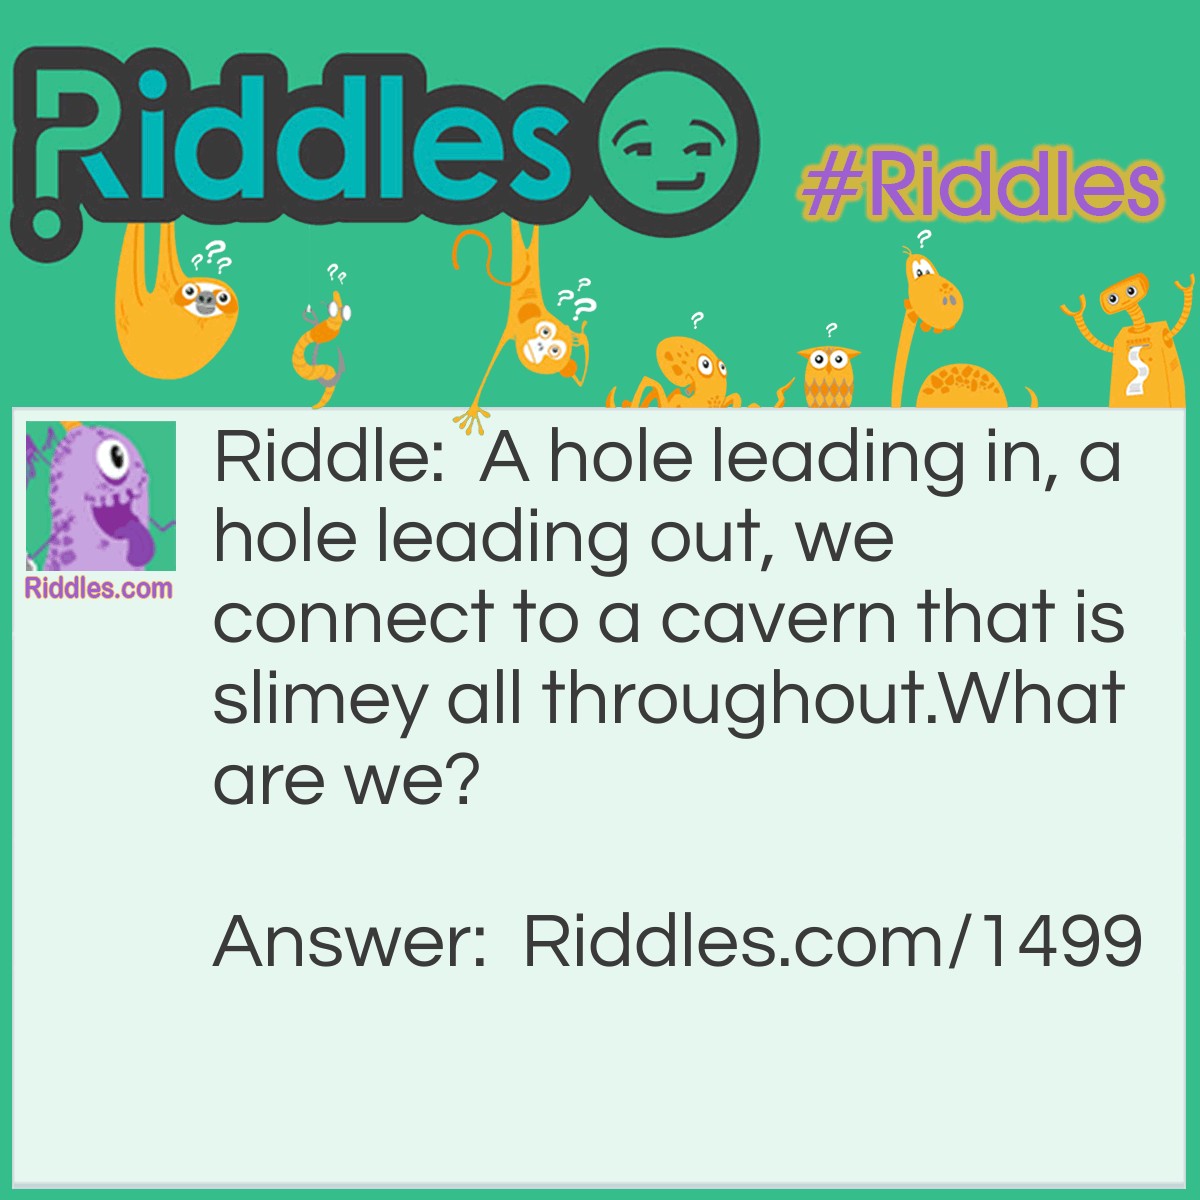 Riddle: A hole leading in, a hole leading out, we connect to a cavern that is slimey all throughout.
What are we? Answer: Your nose.